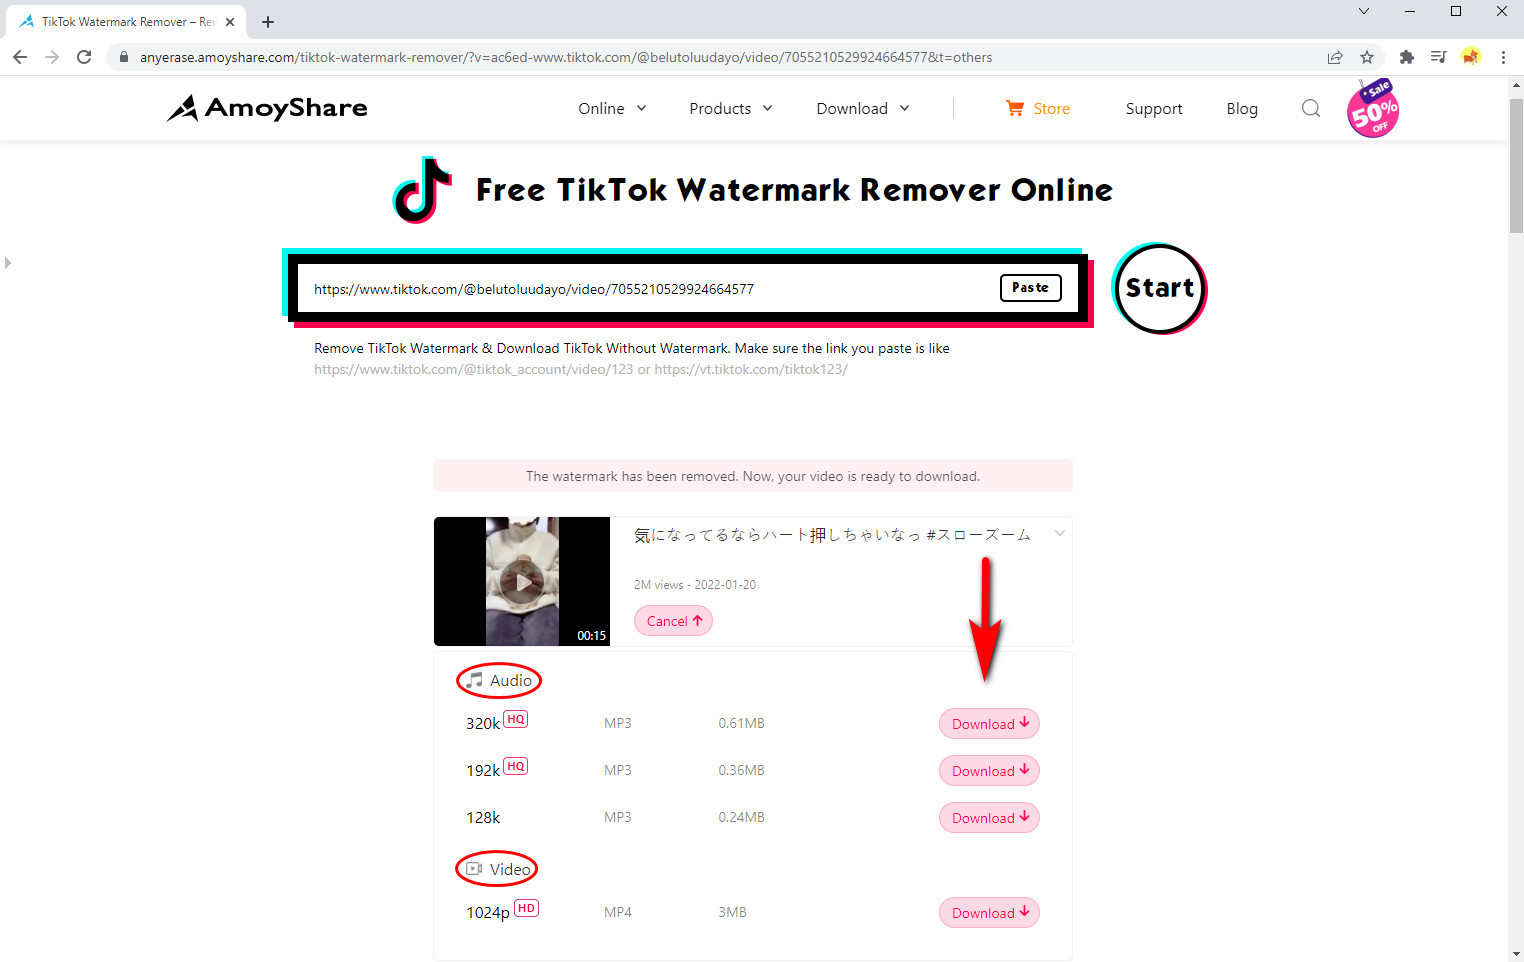 Download the TikTok video with watermark removed